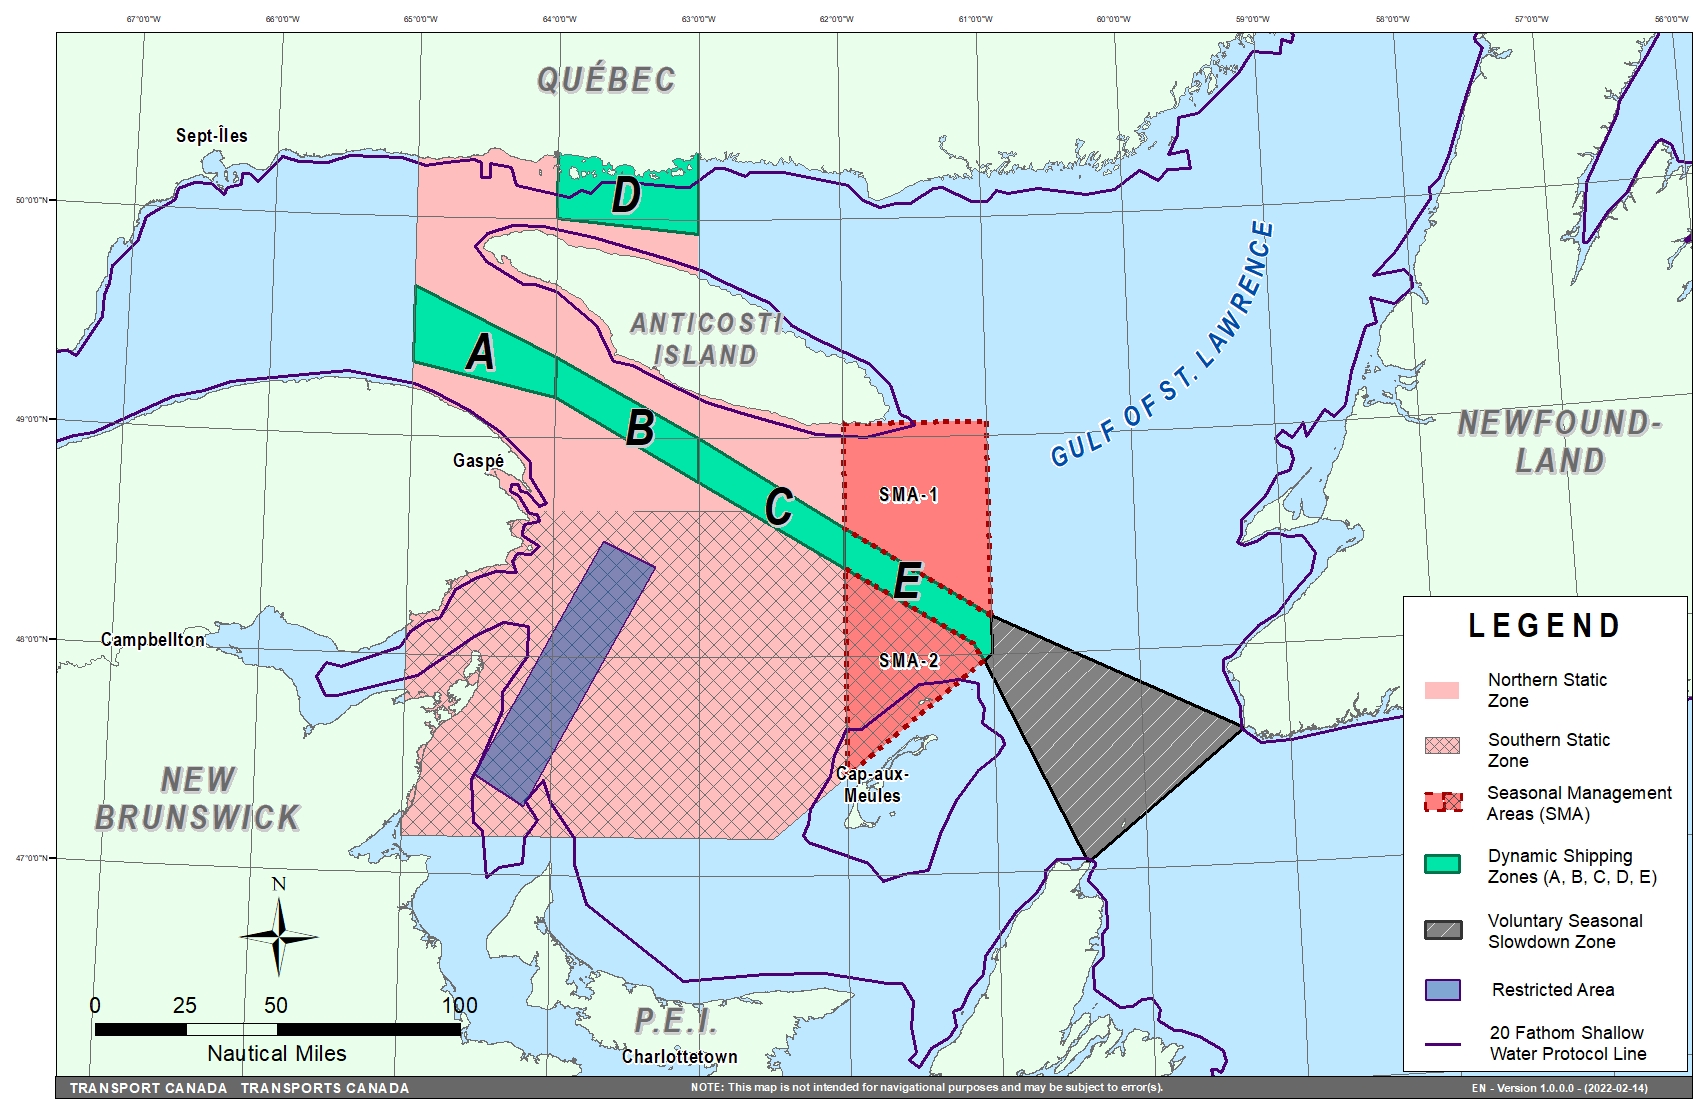 Map showing the static zones, the dynamic shipping zones (A, B, C, D and E), the seasonal management areas, the Shediac Valley restricted area, the 20 fathom shallow water protocol line and the voluntary seasonal slowdown zone